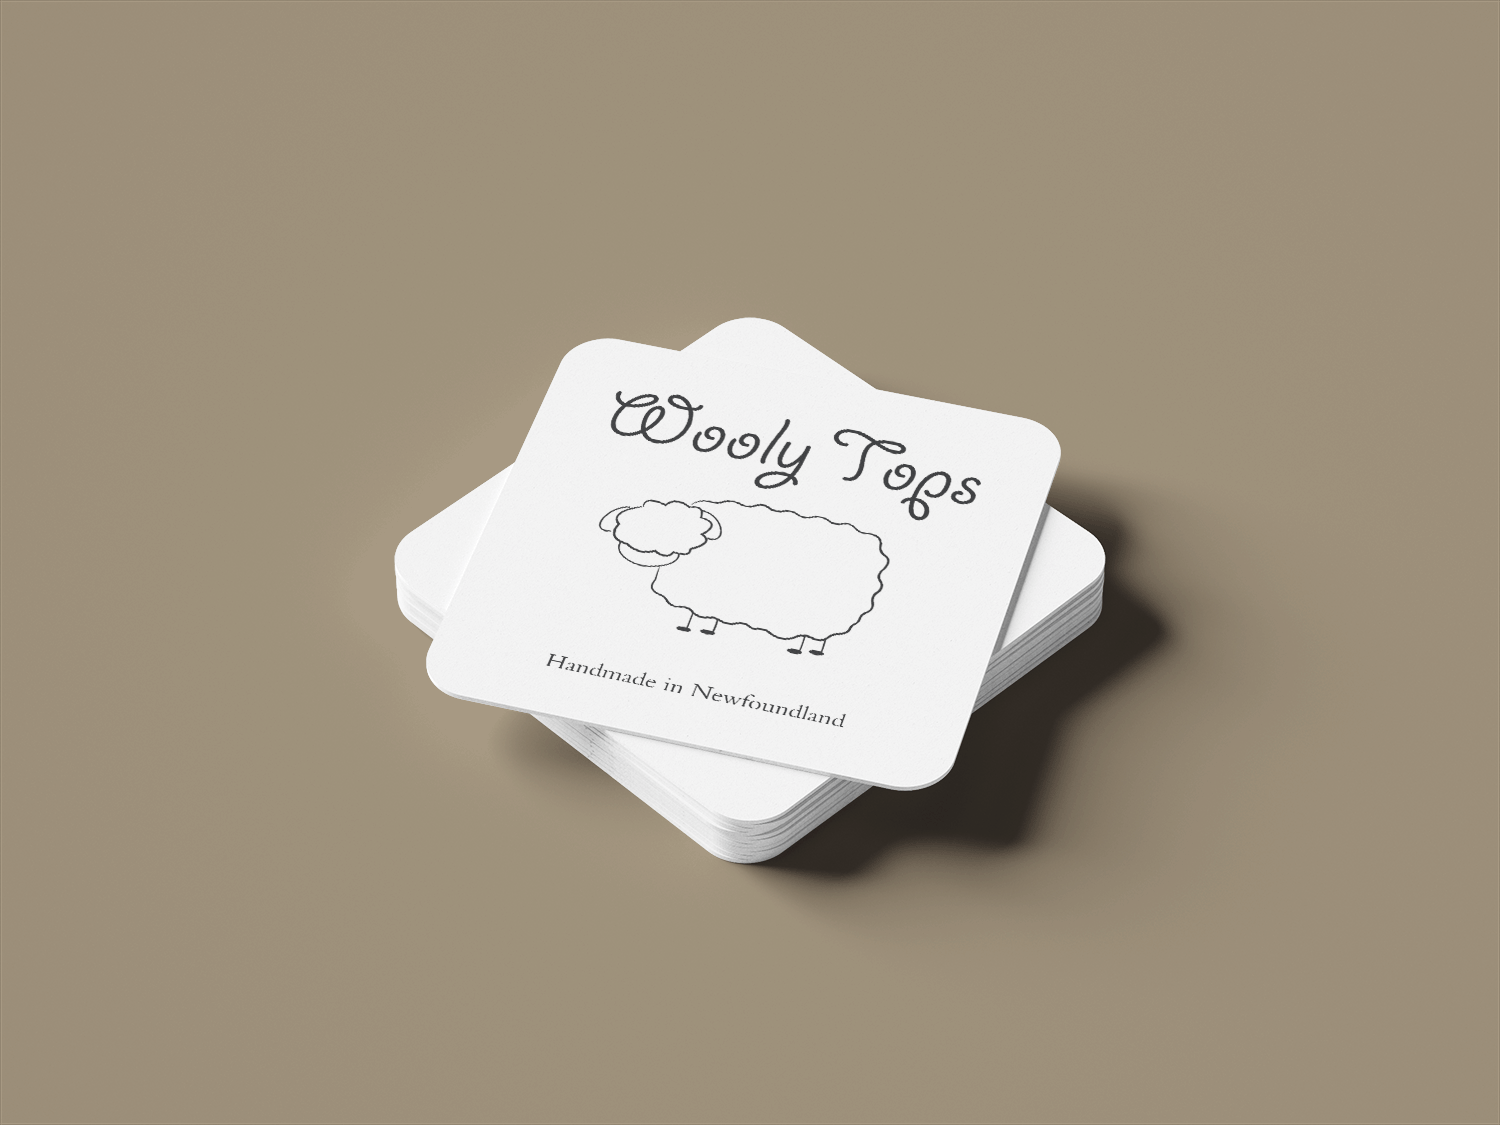 A mockup of the business cards designed for Wooly Tops.